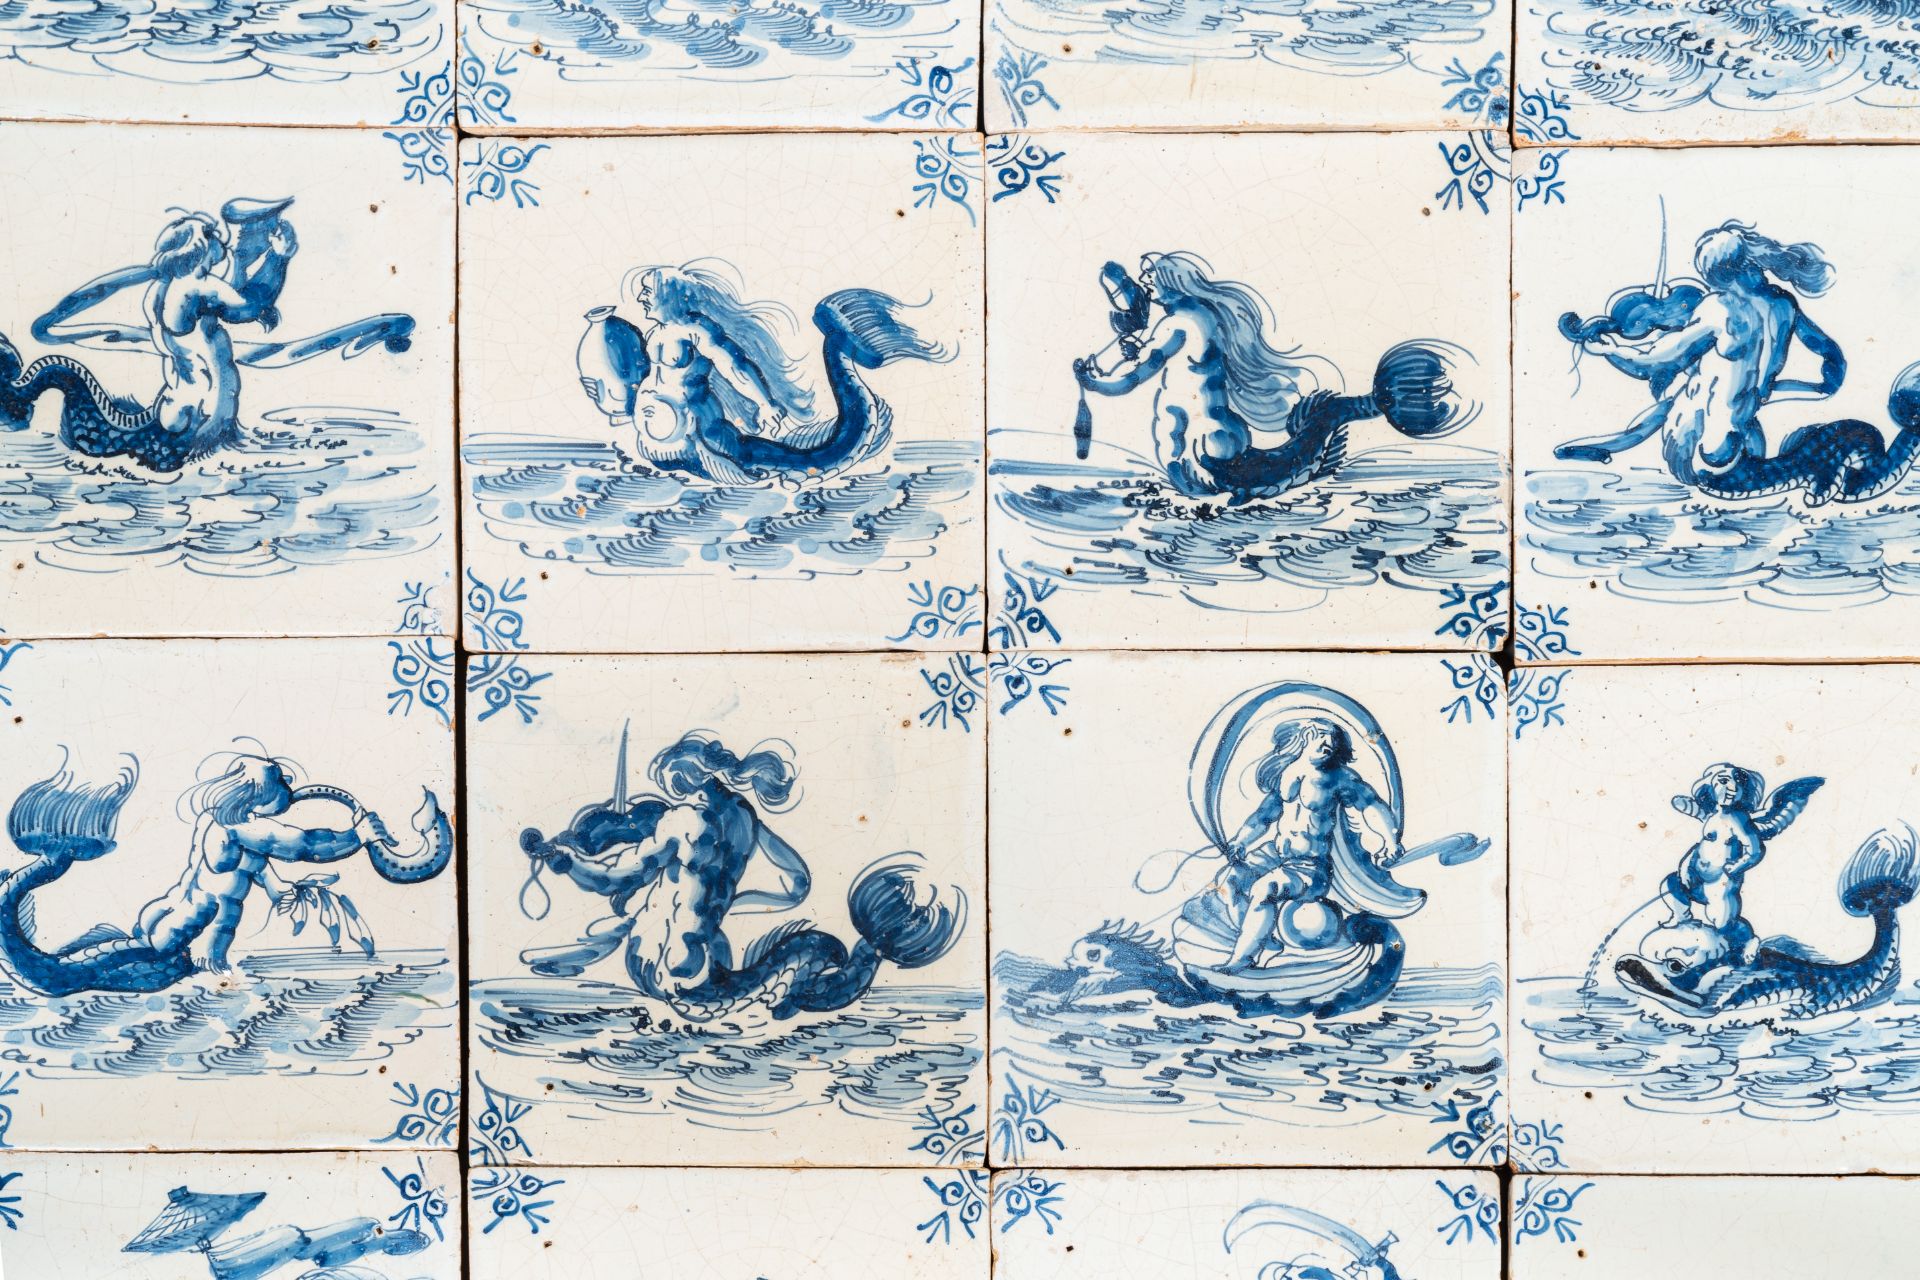 An exceptional set of 25 Dutch Delft blue and white tiles with fine sea monsters, Harlingen, Friesla - Bild 4 aus 4